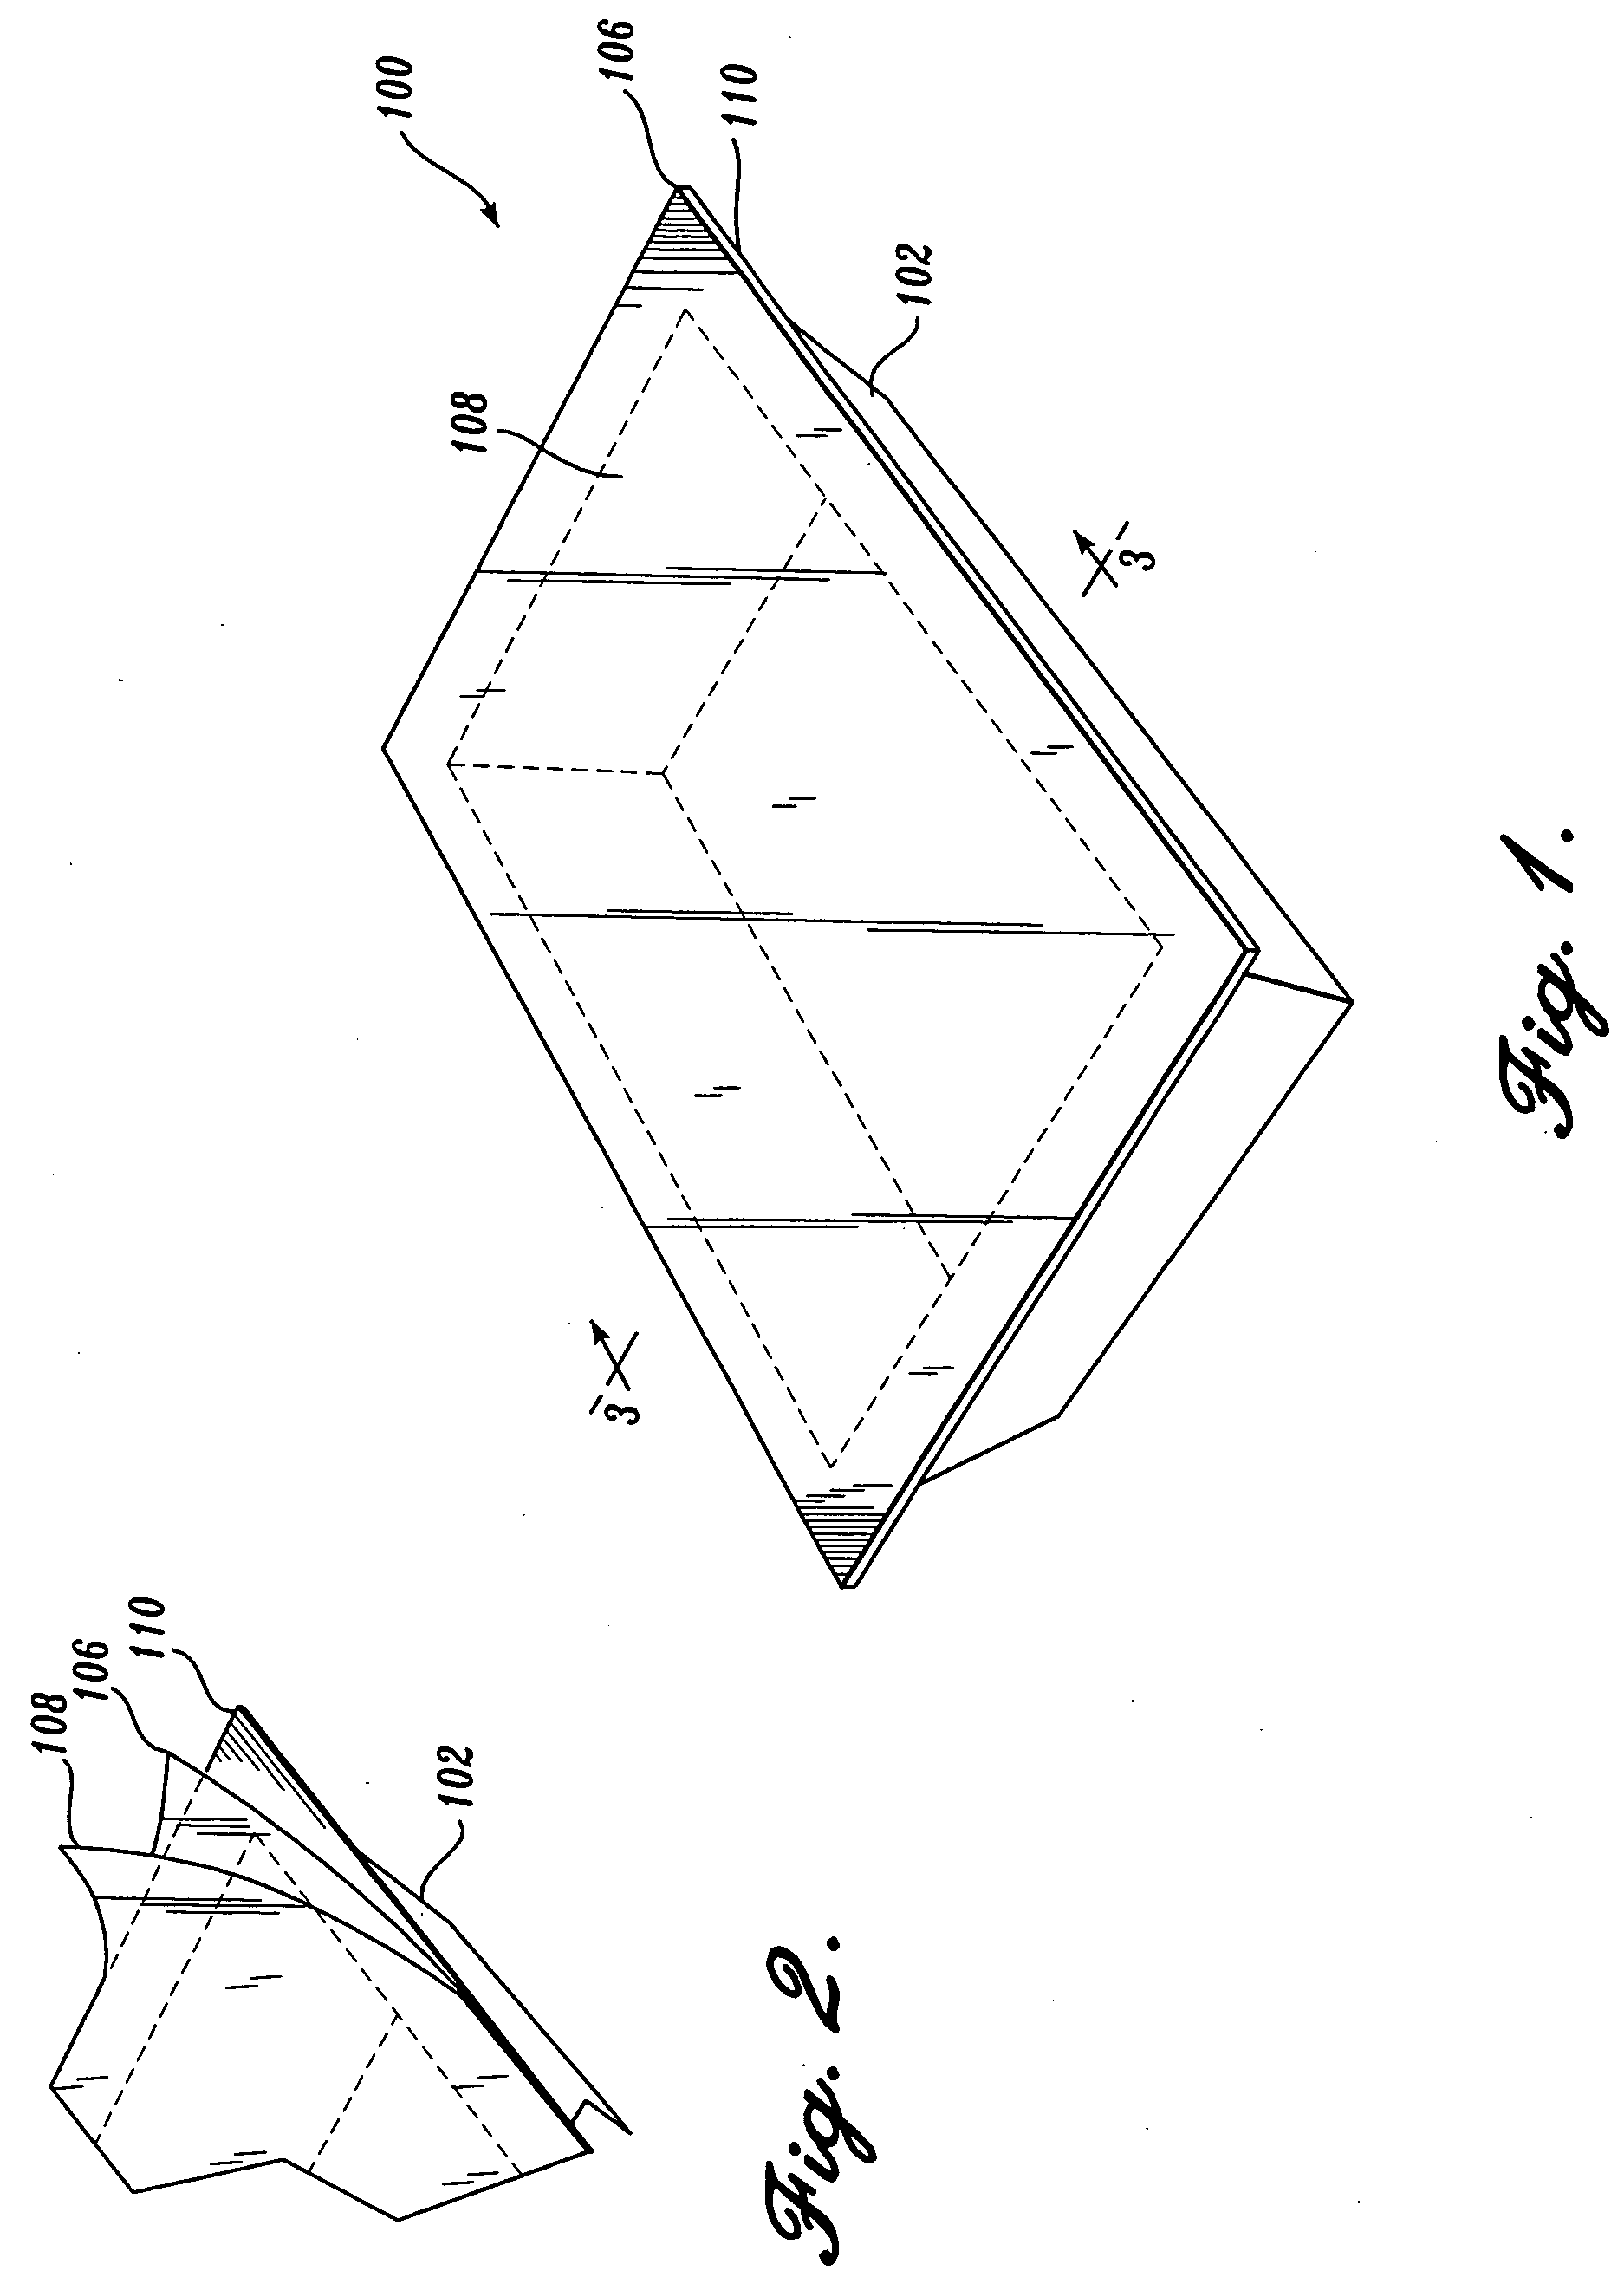 Products, methods and apparatus for fresh meat processing and packaging